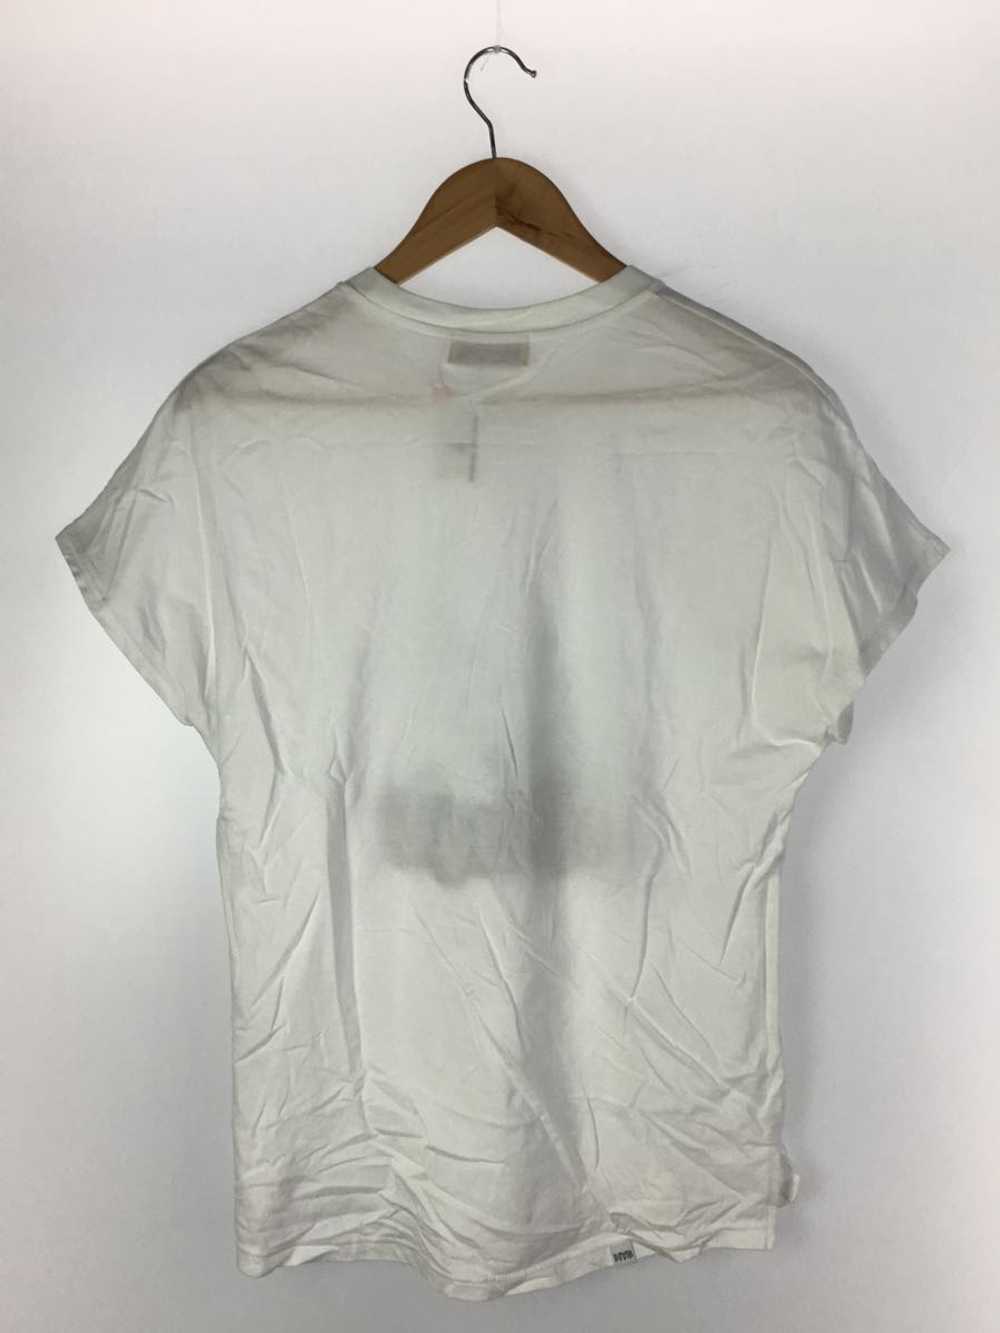 Used Hysteric Glamor T-Shirt/Free/Cotton/White/01… - image 2